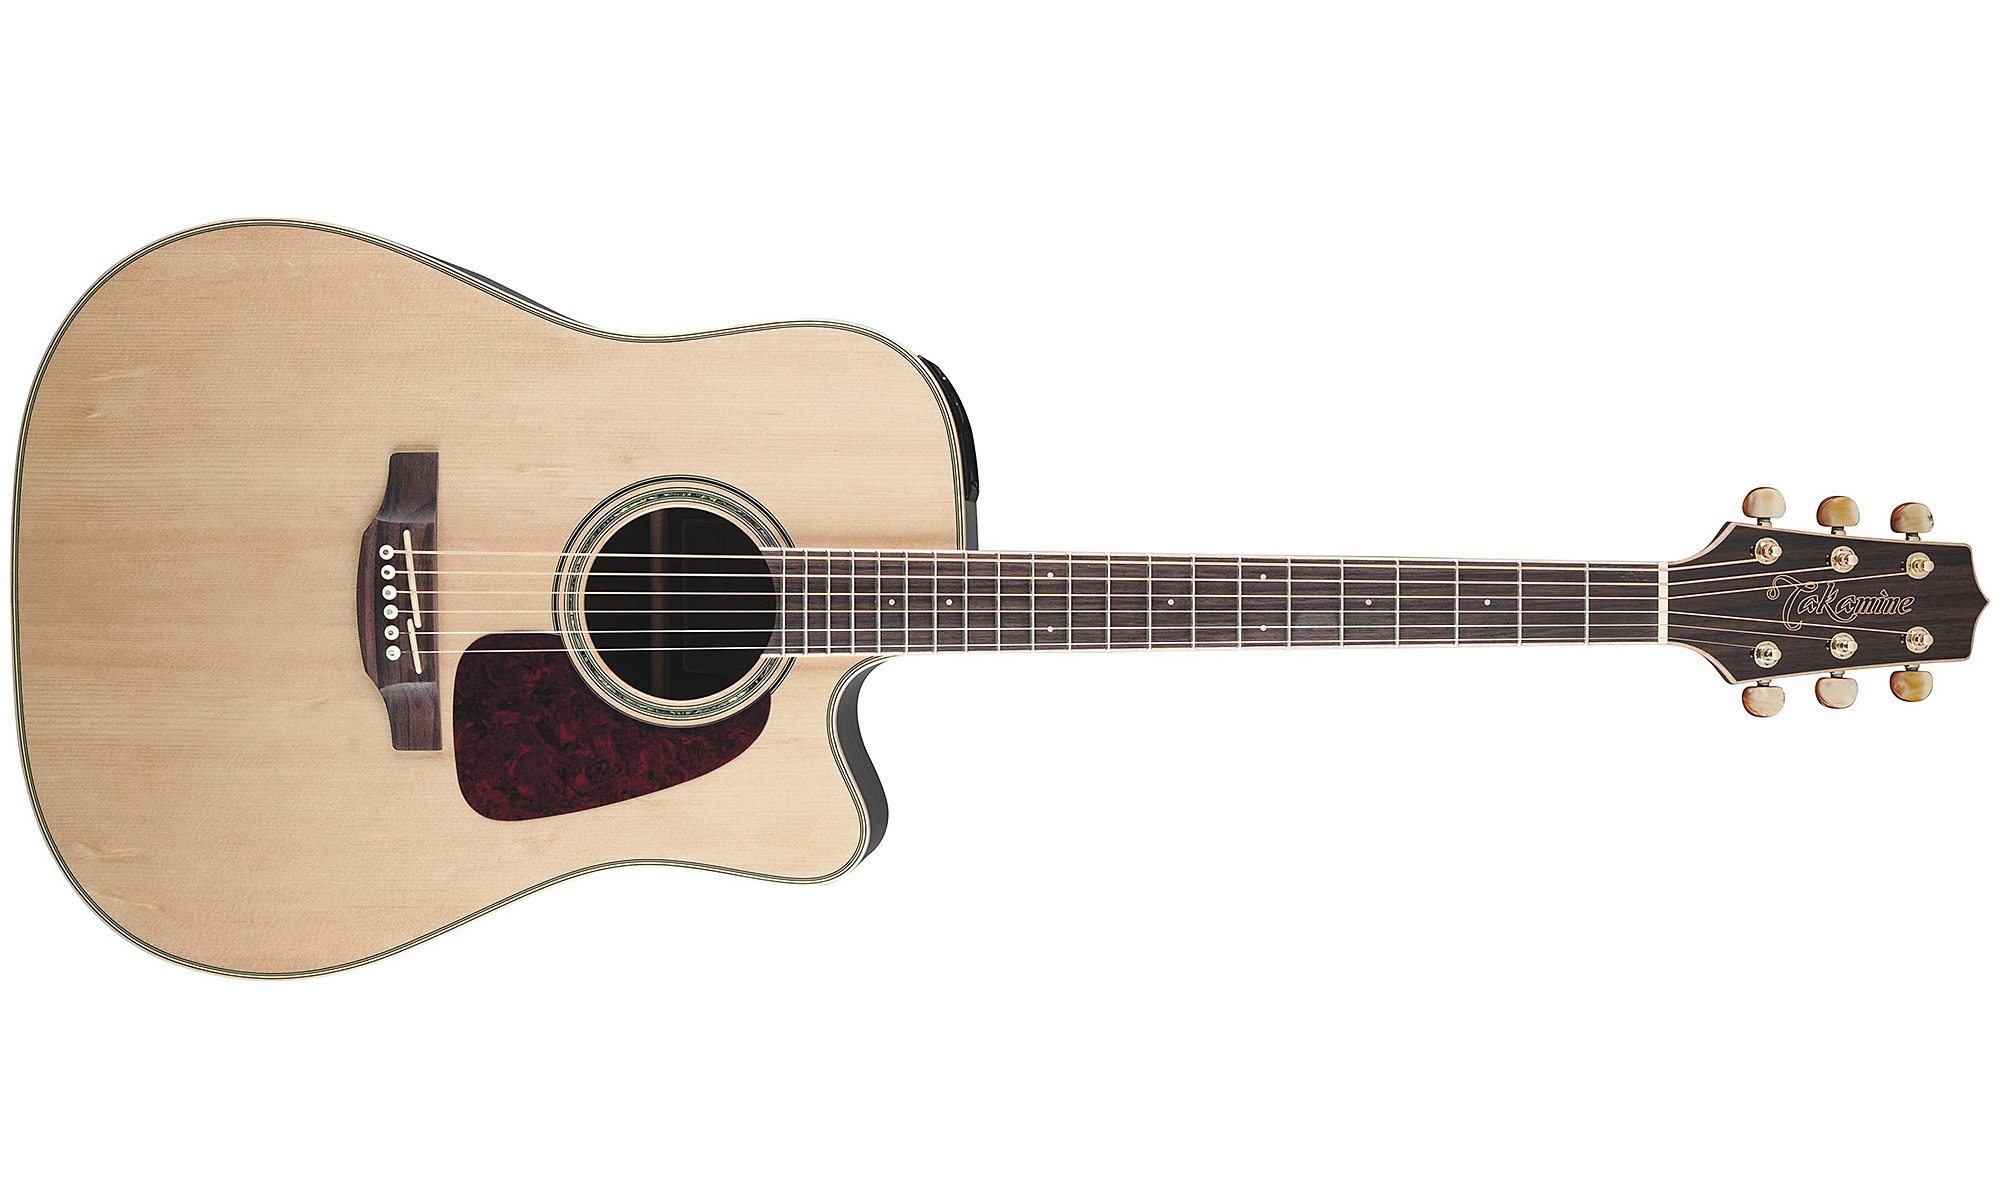 Takamine Gd71ce-nat Dreadnought Cw Epicea Palissandre - Natural Gloss - Guitarra electro acustica - Variation 4